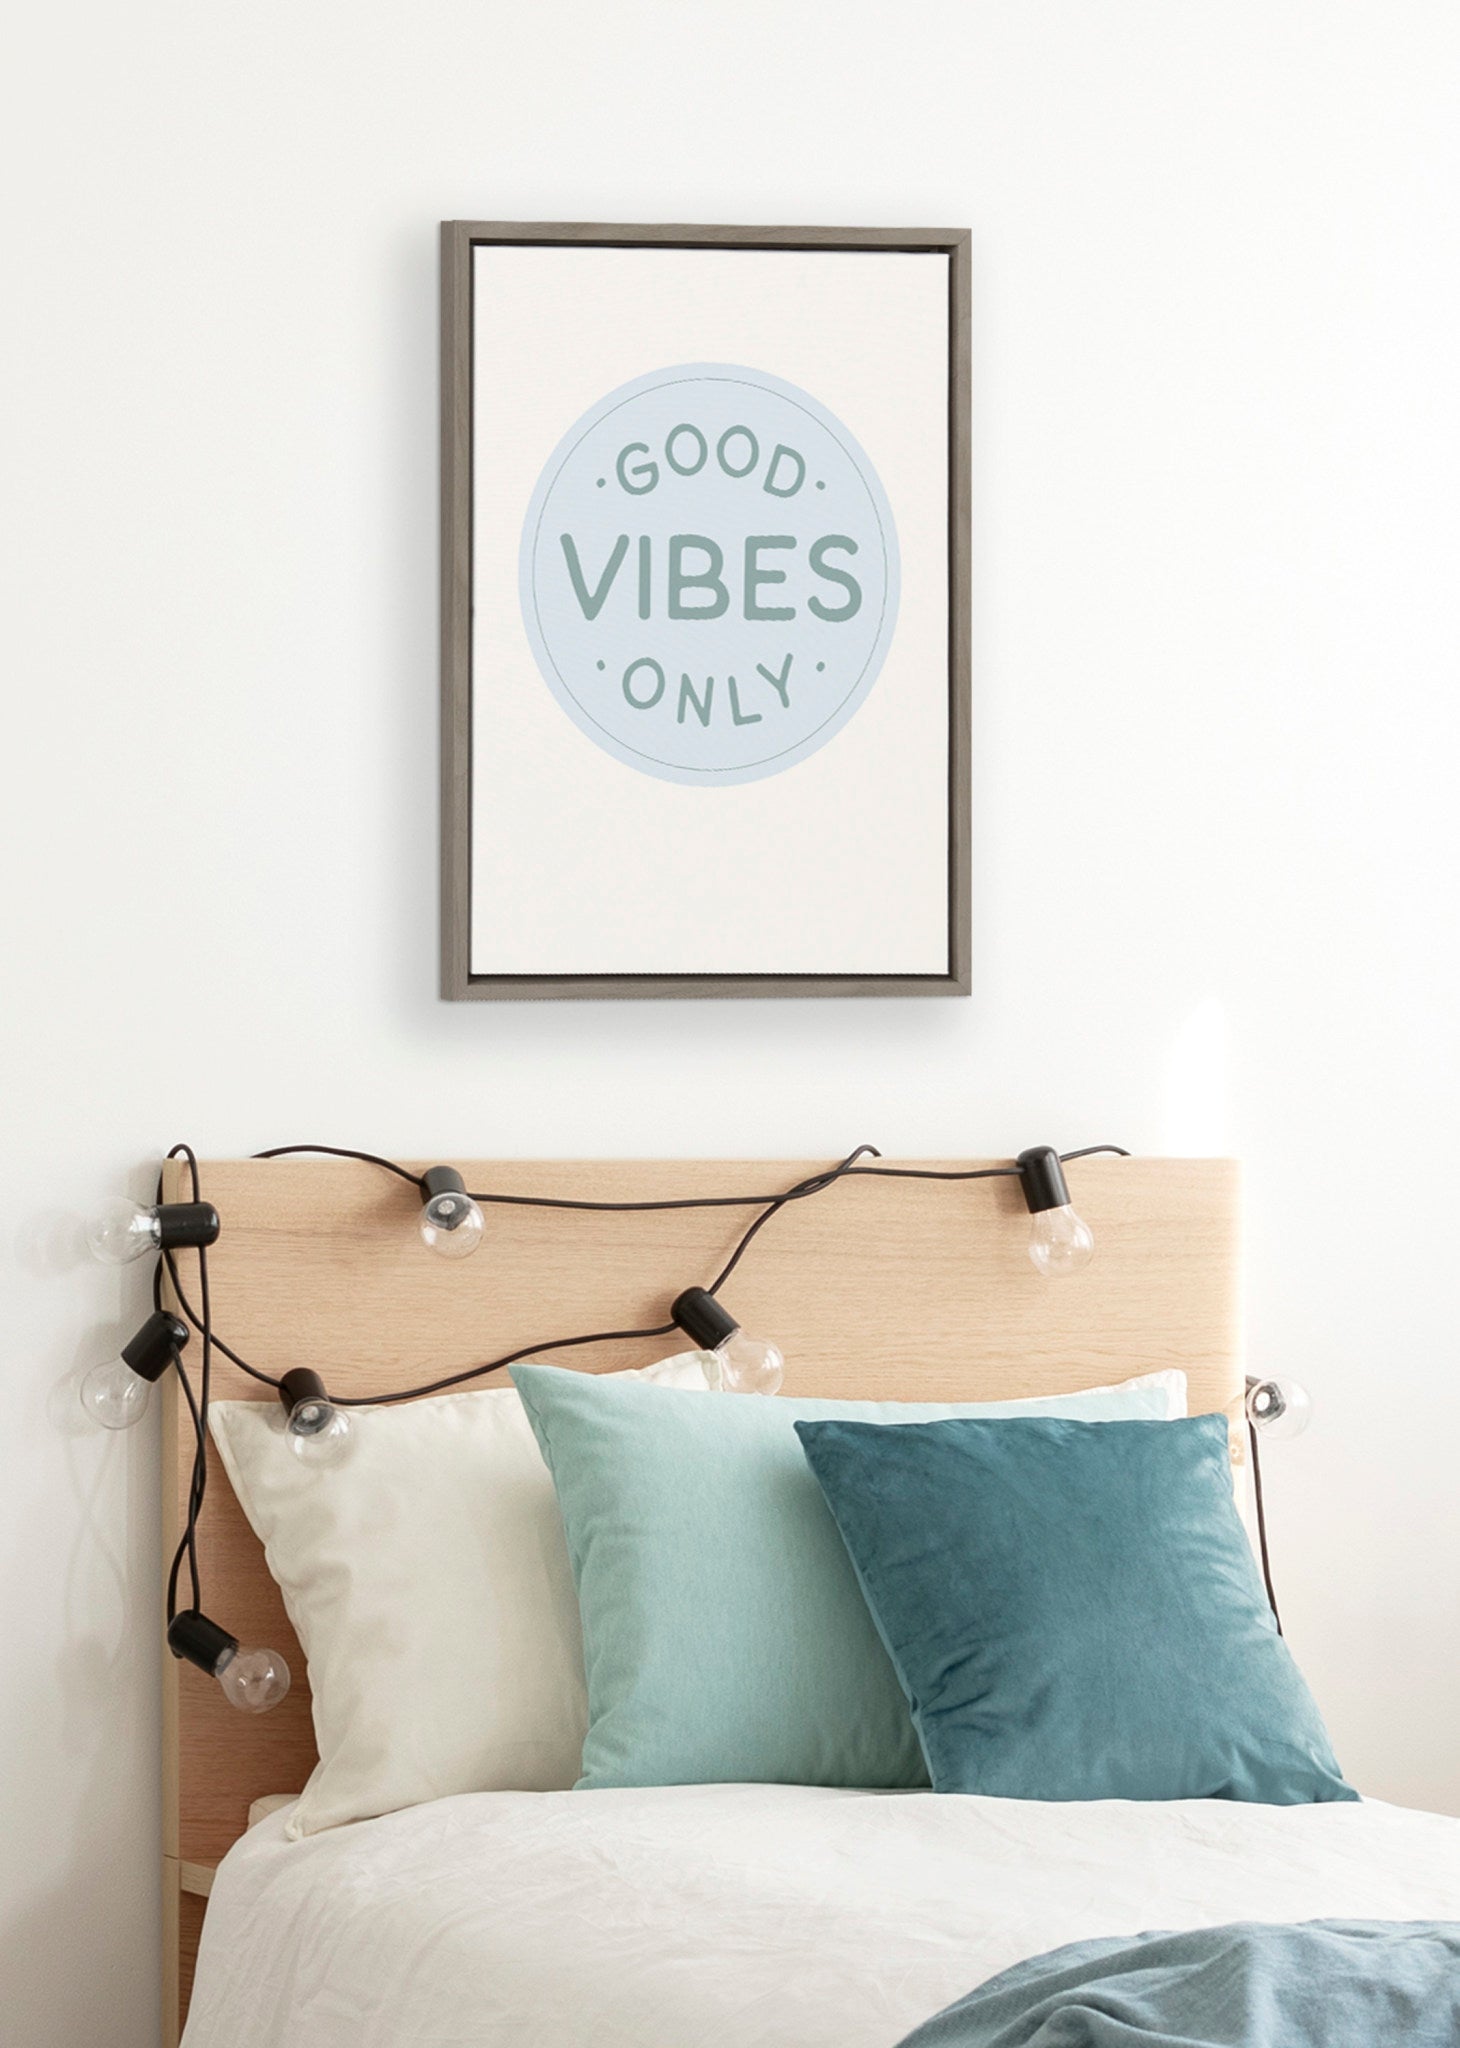 Sylvie Good Vibes Only Pale Blue Button Framed Canvas by The Creative Bunch Studio